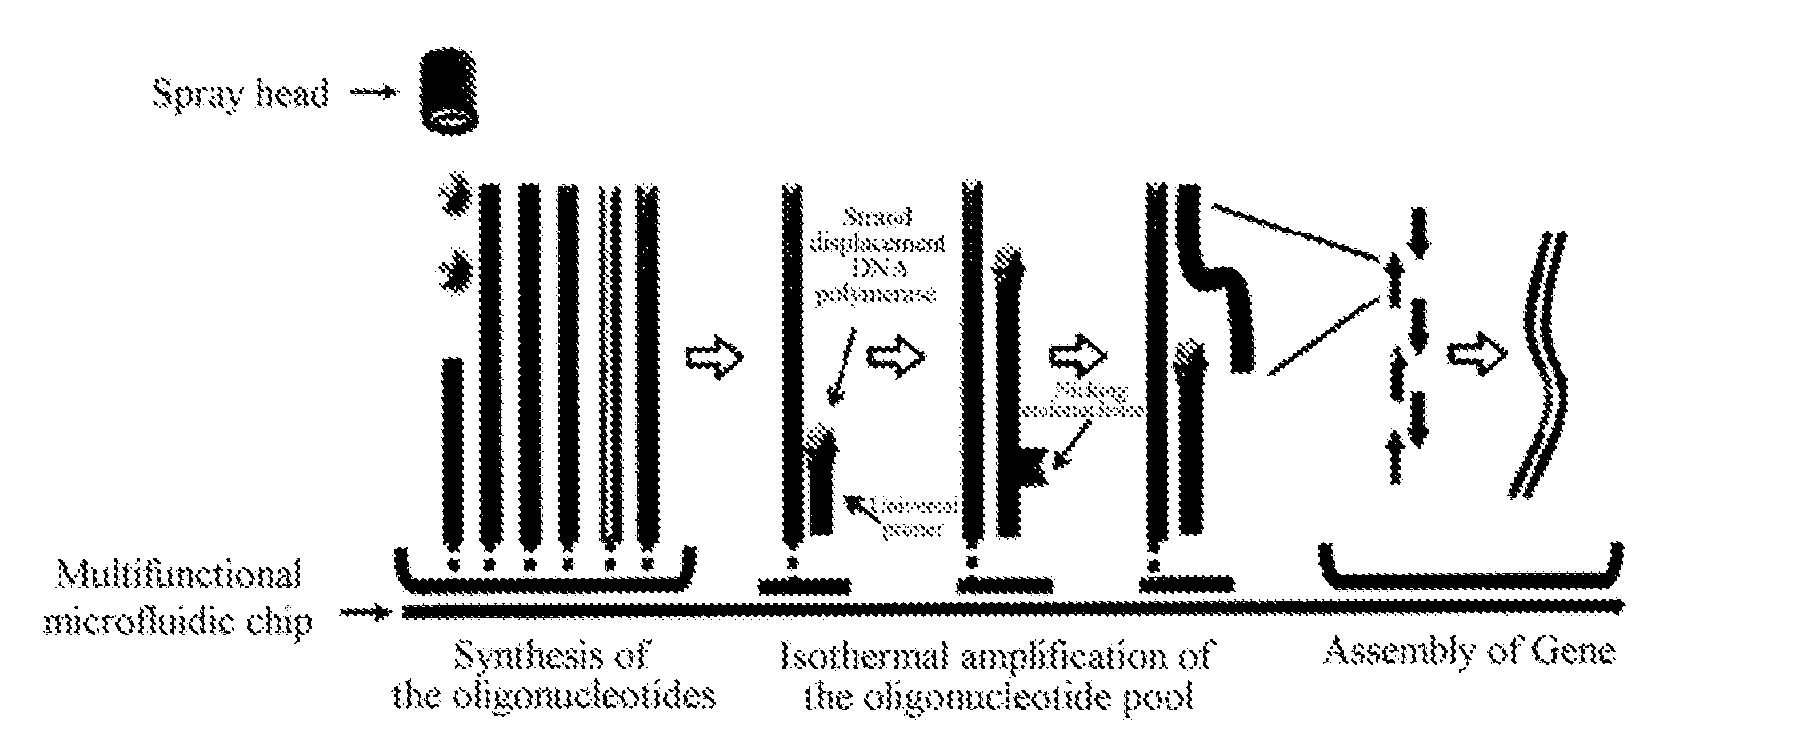 Gene synthesis process, gene chip and kit